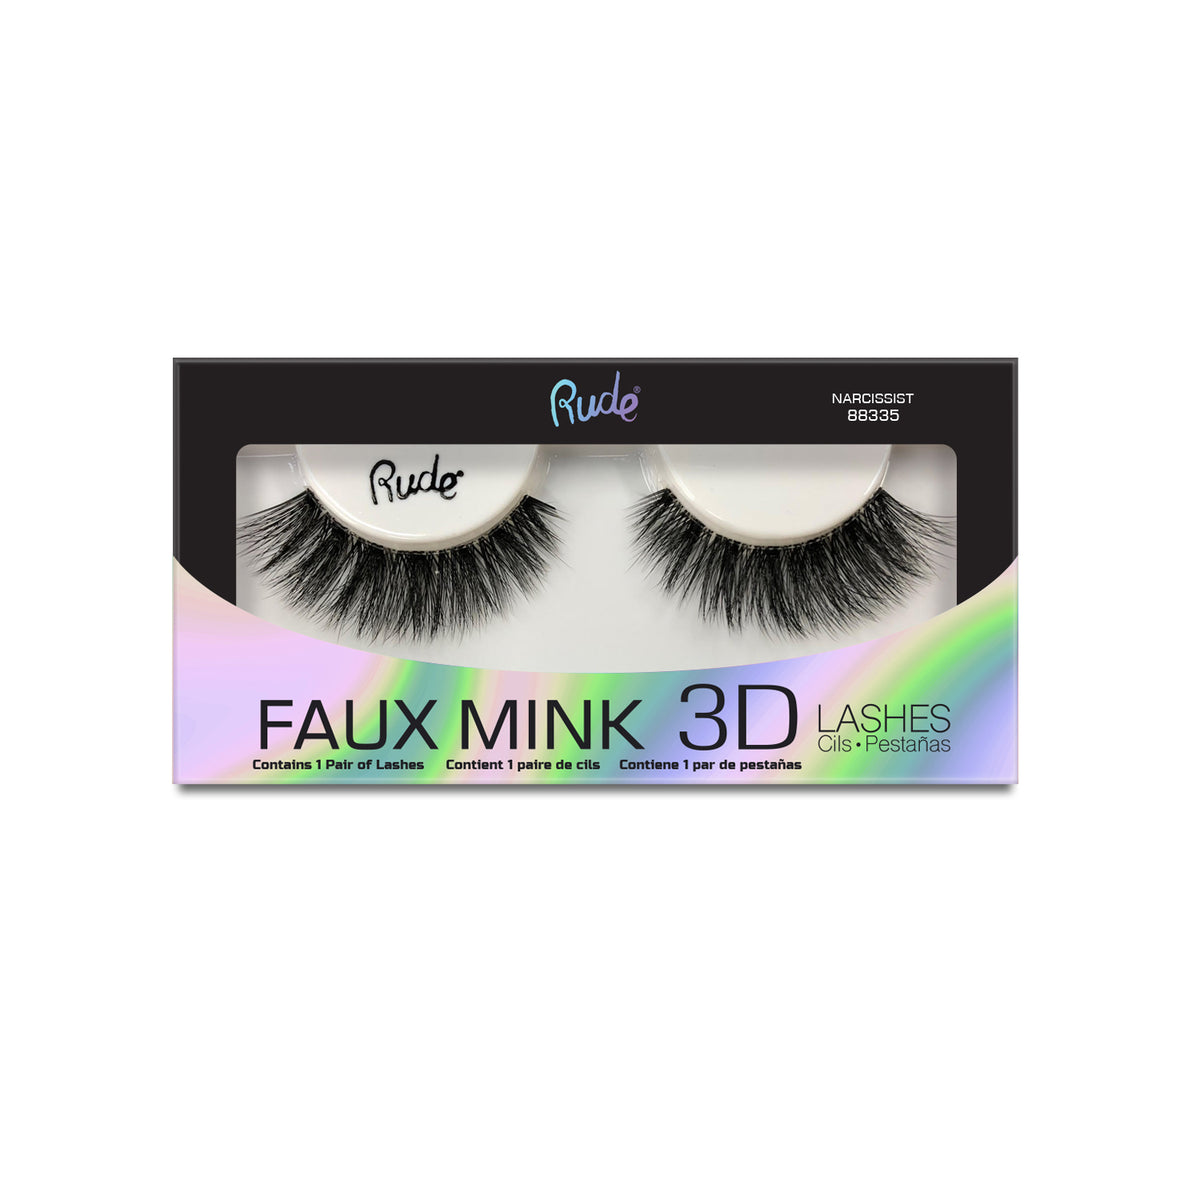 3D Lashes | Full and Fluffy Faux Mink Lashes Narcissist